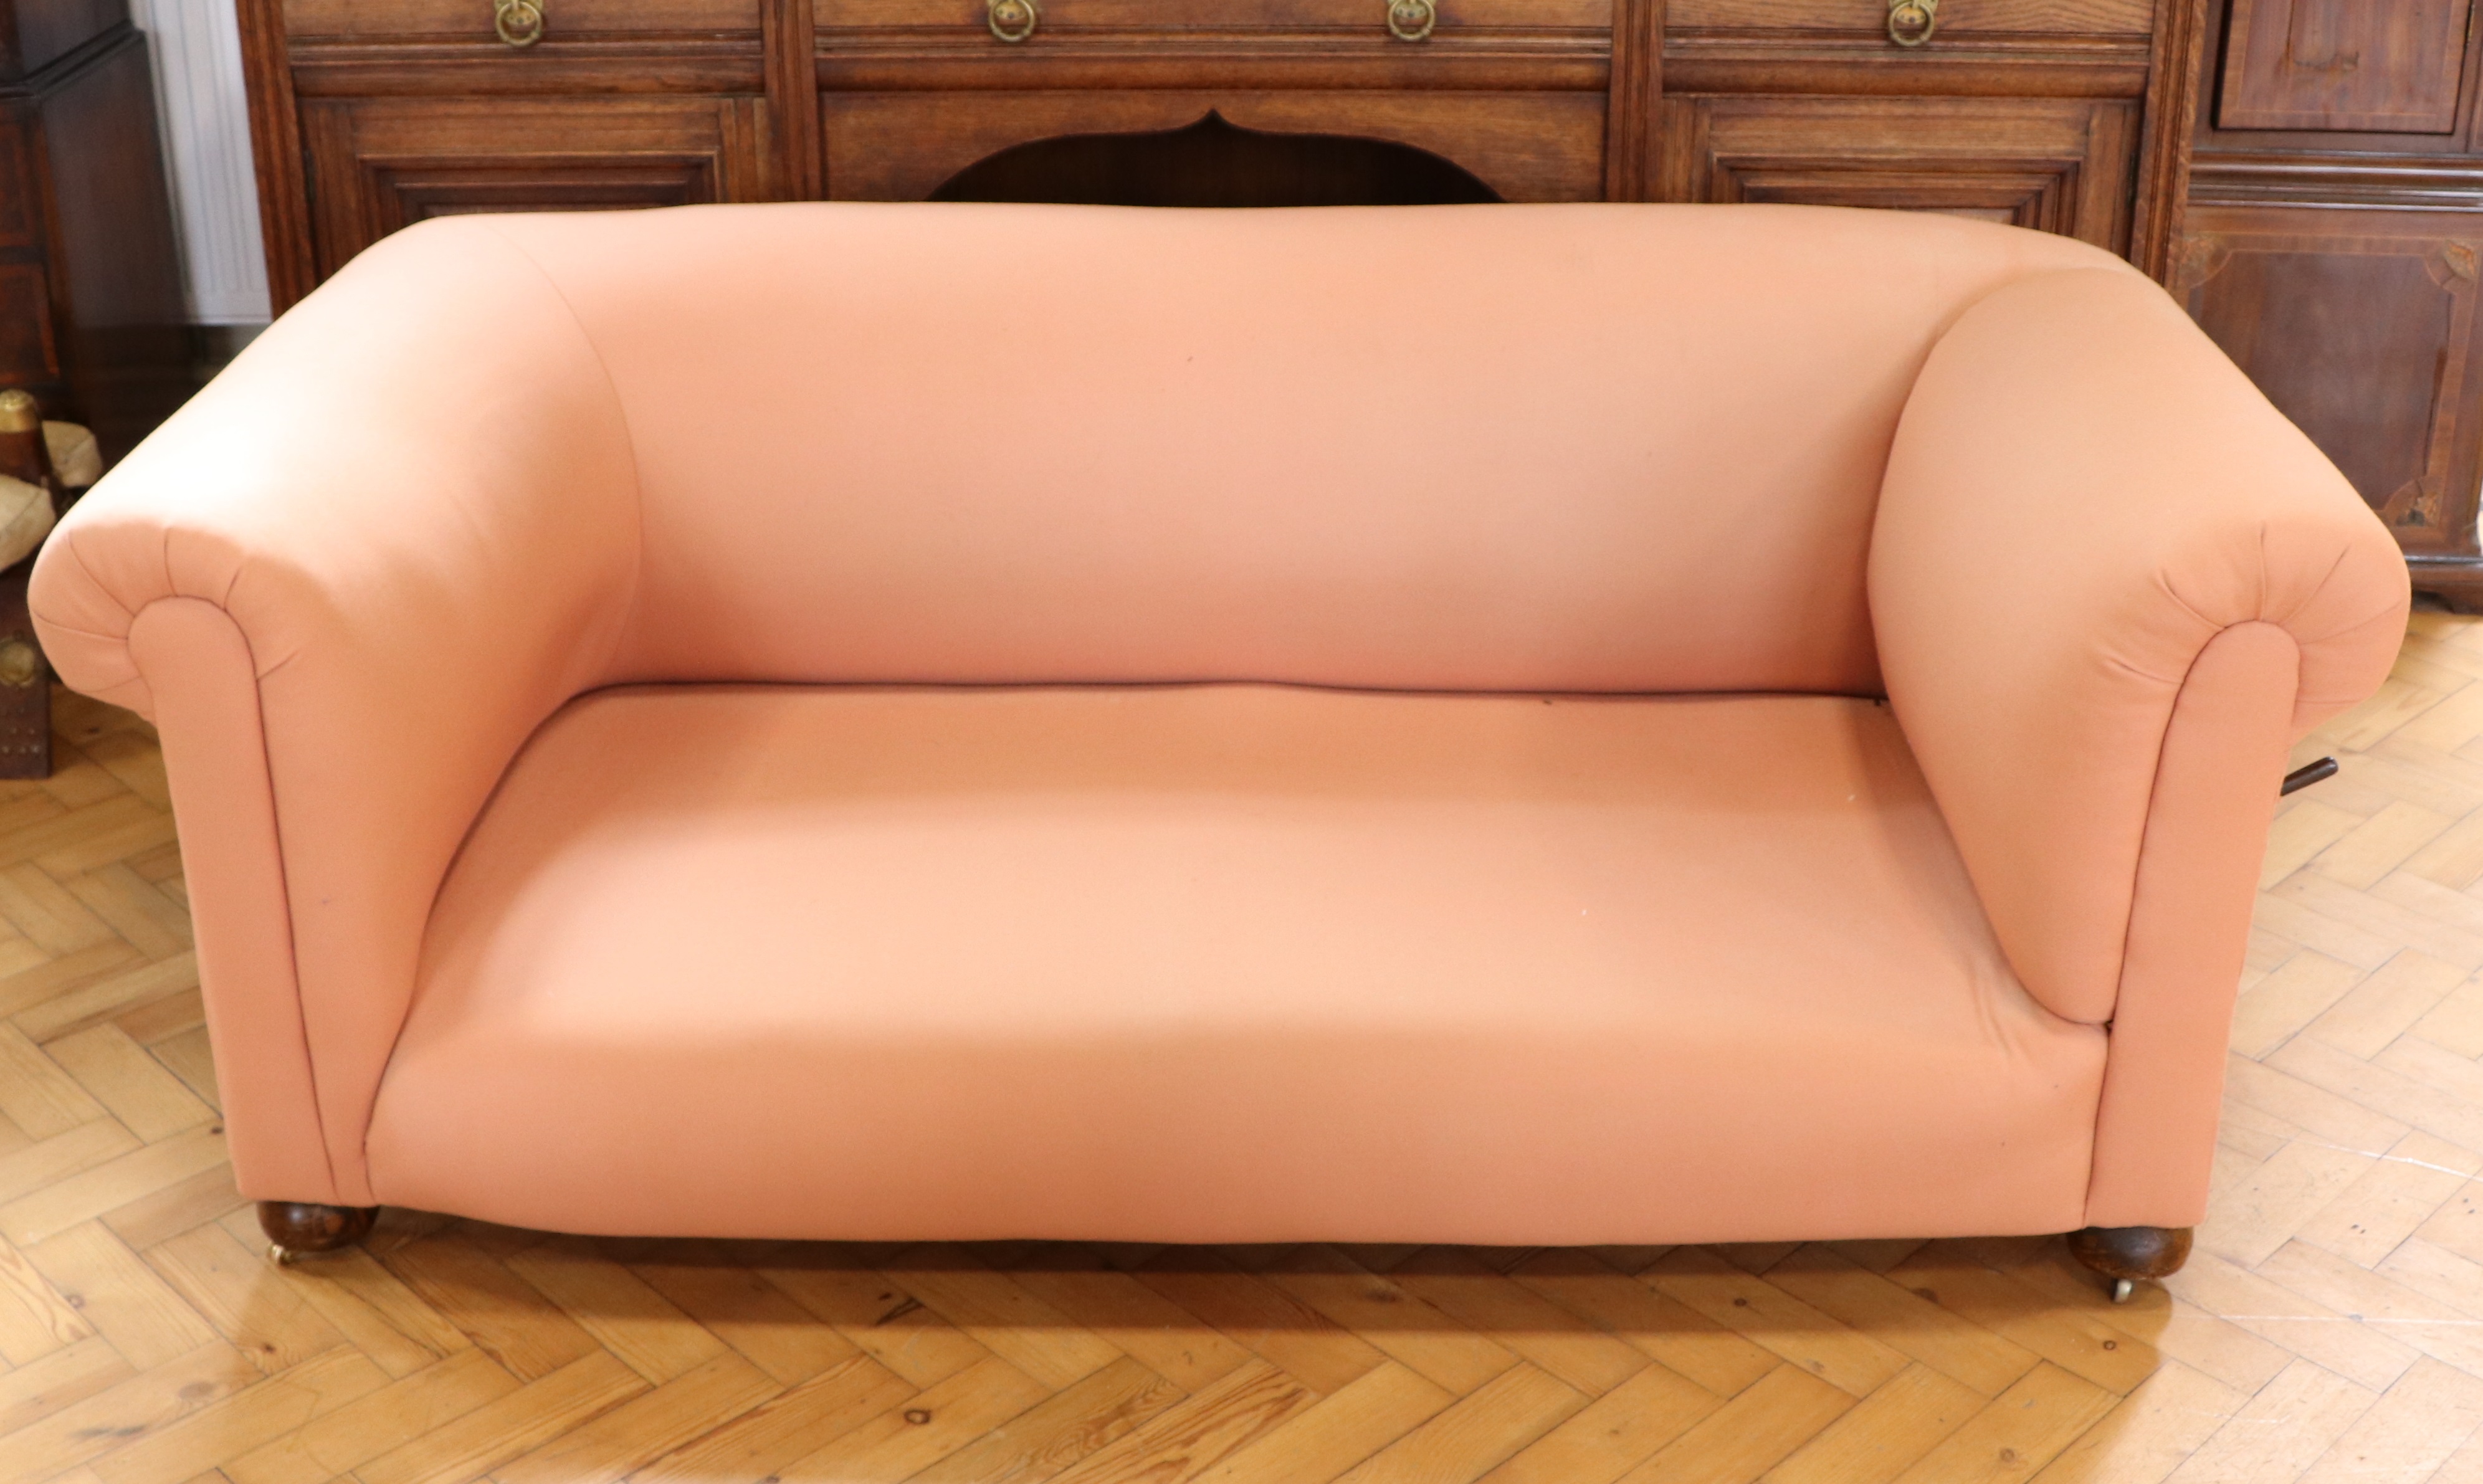 A re-upholstered early 20th Century two-seater Chesterfield drop-arm sofa, 170 cm x 85 cm x 67 cm - Image 2 of 3